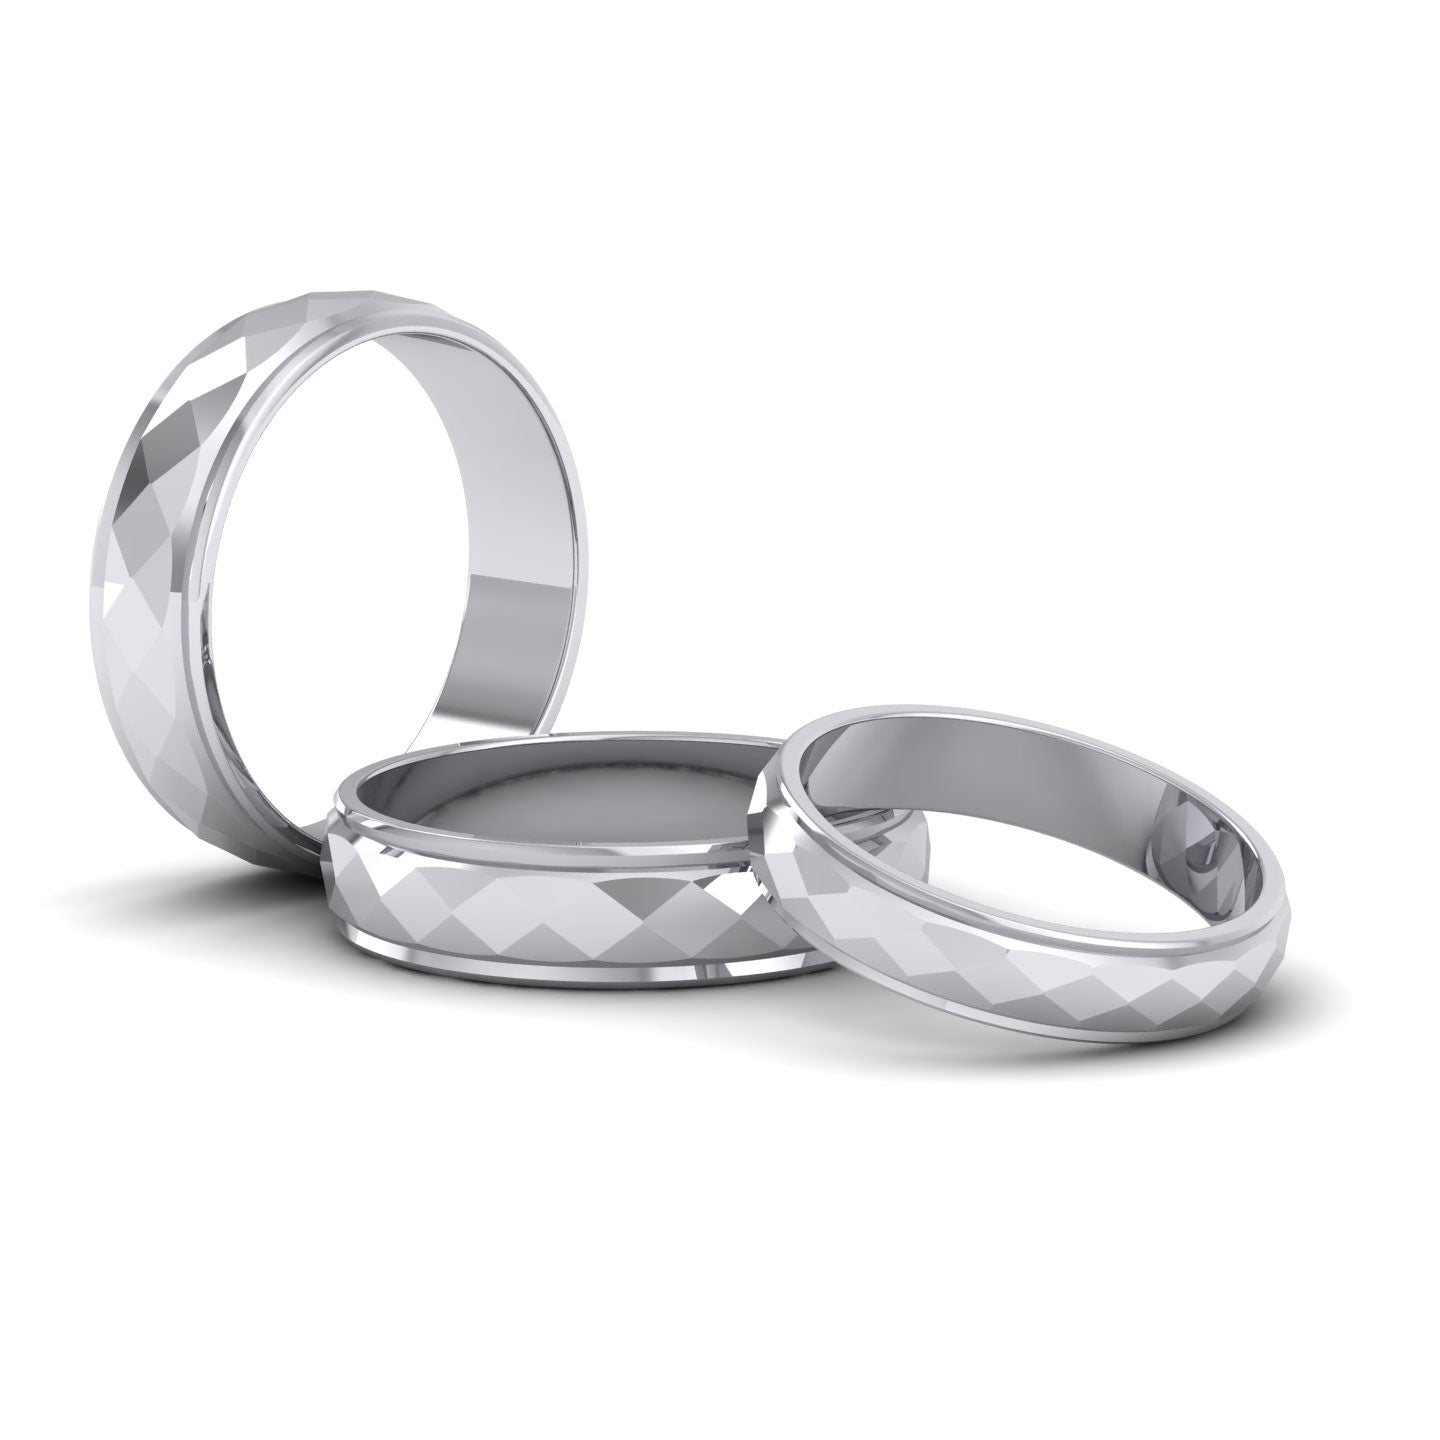 Facet And Line Pattern 9ct White Gold 5mm Wedding Ring